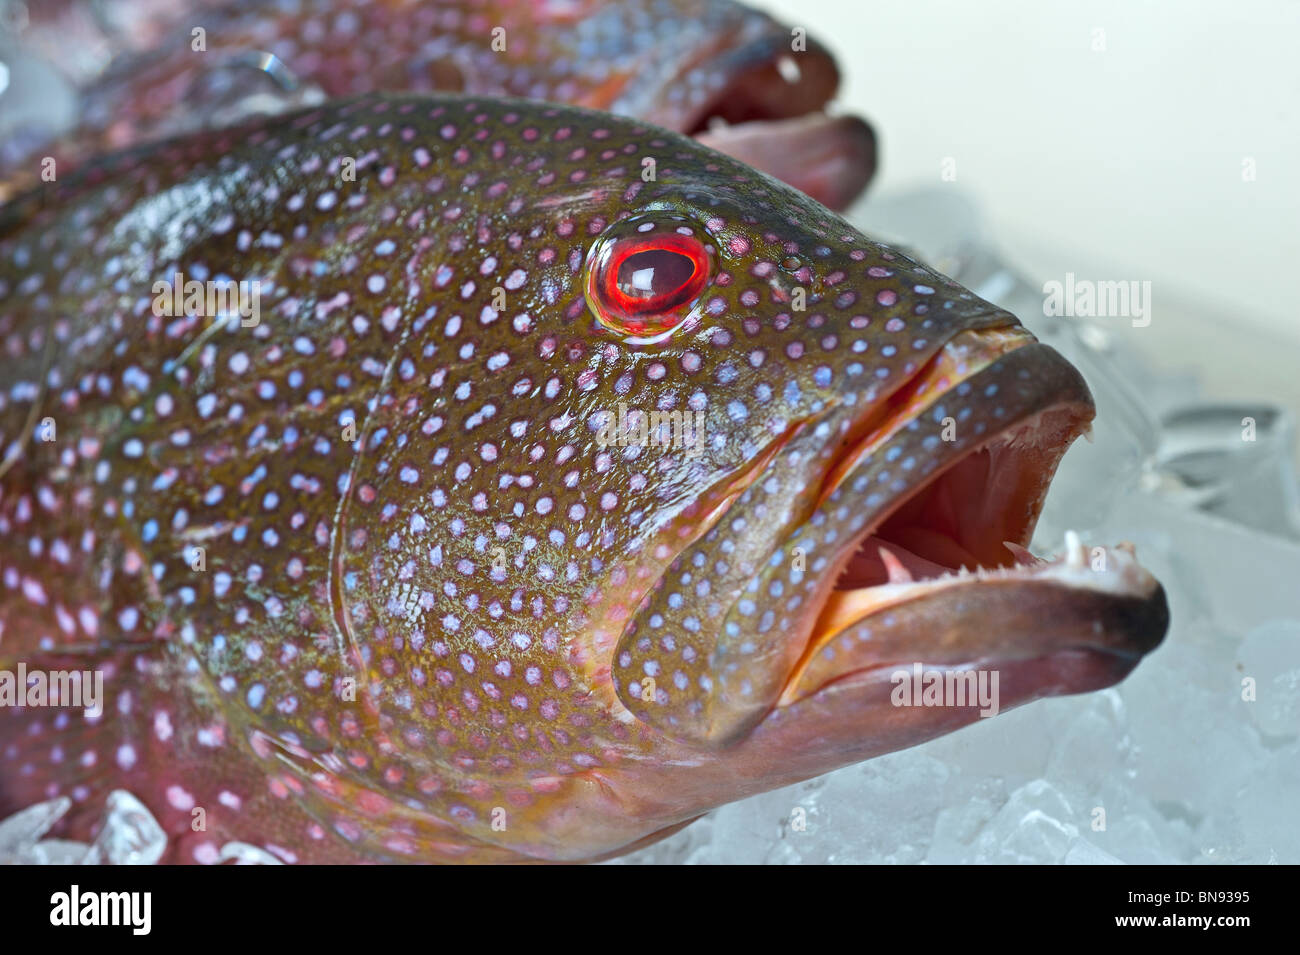 Freshly caught coral grouper fish on an ice display in a restaurant Stock Photo